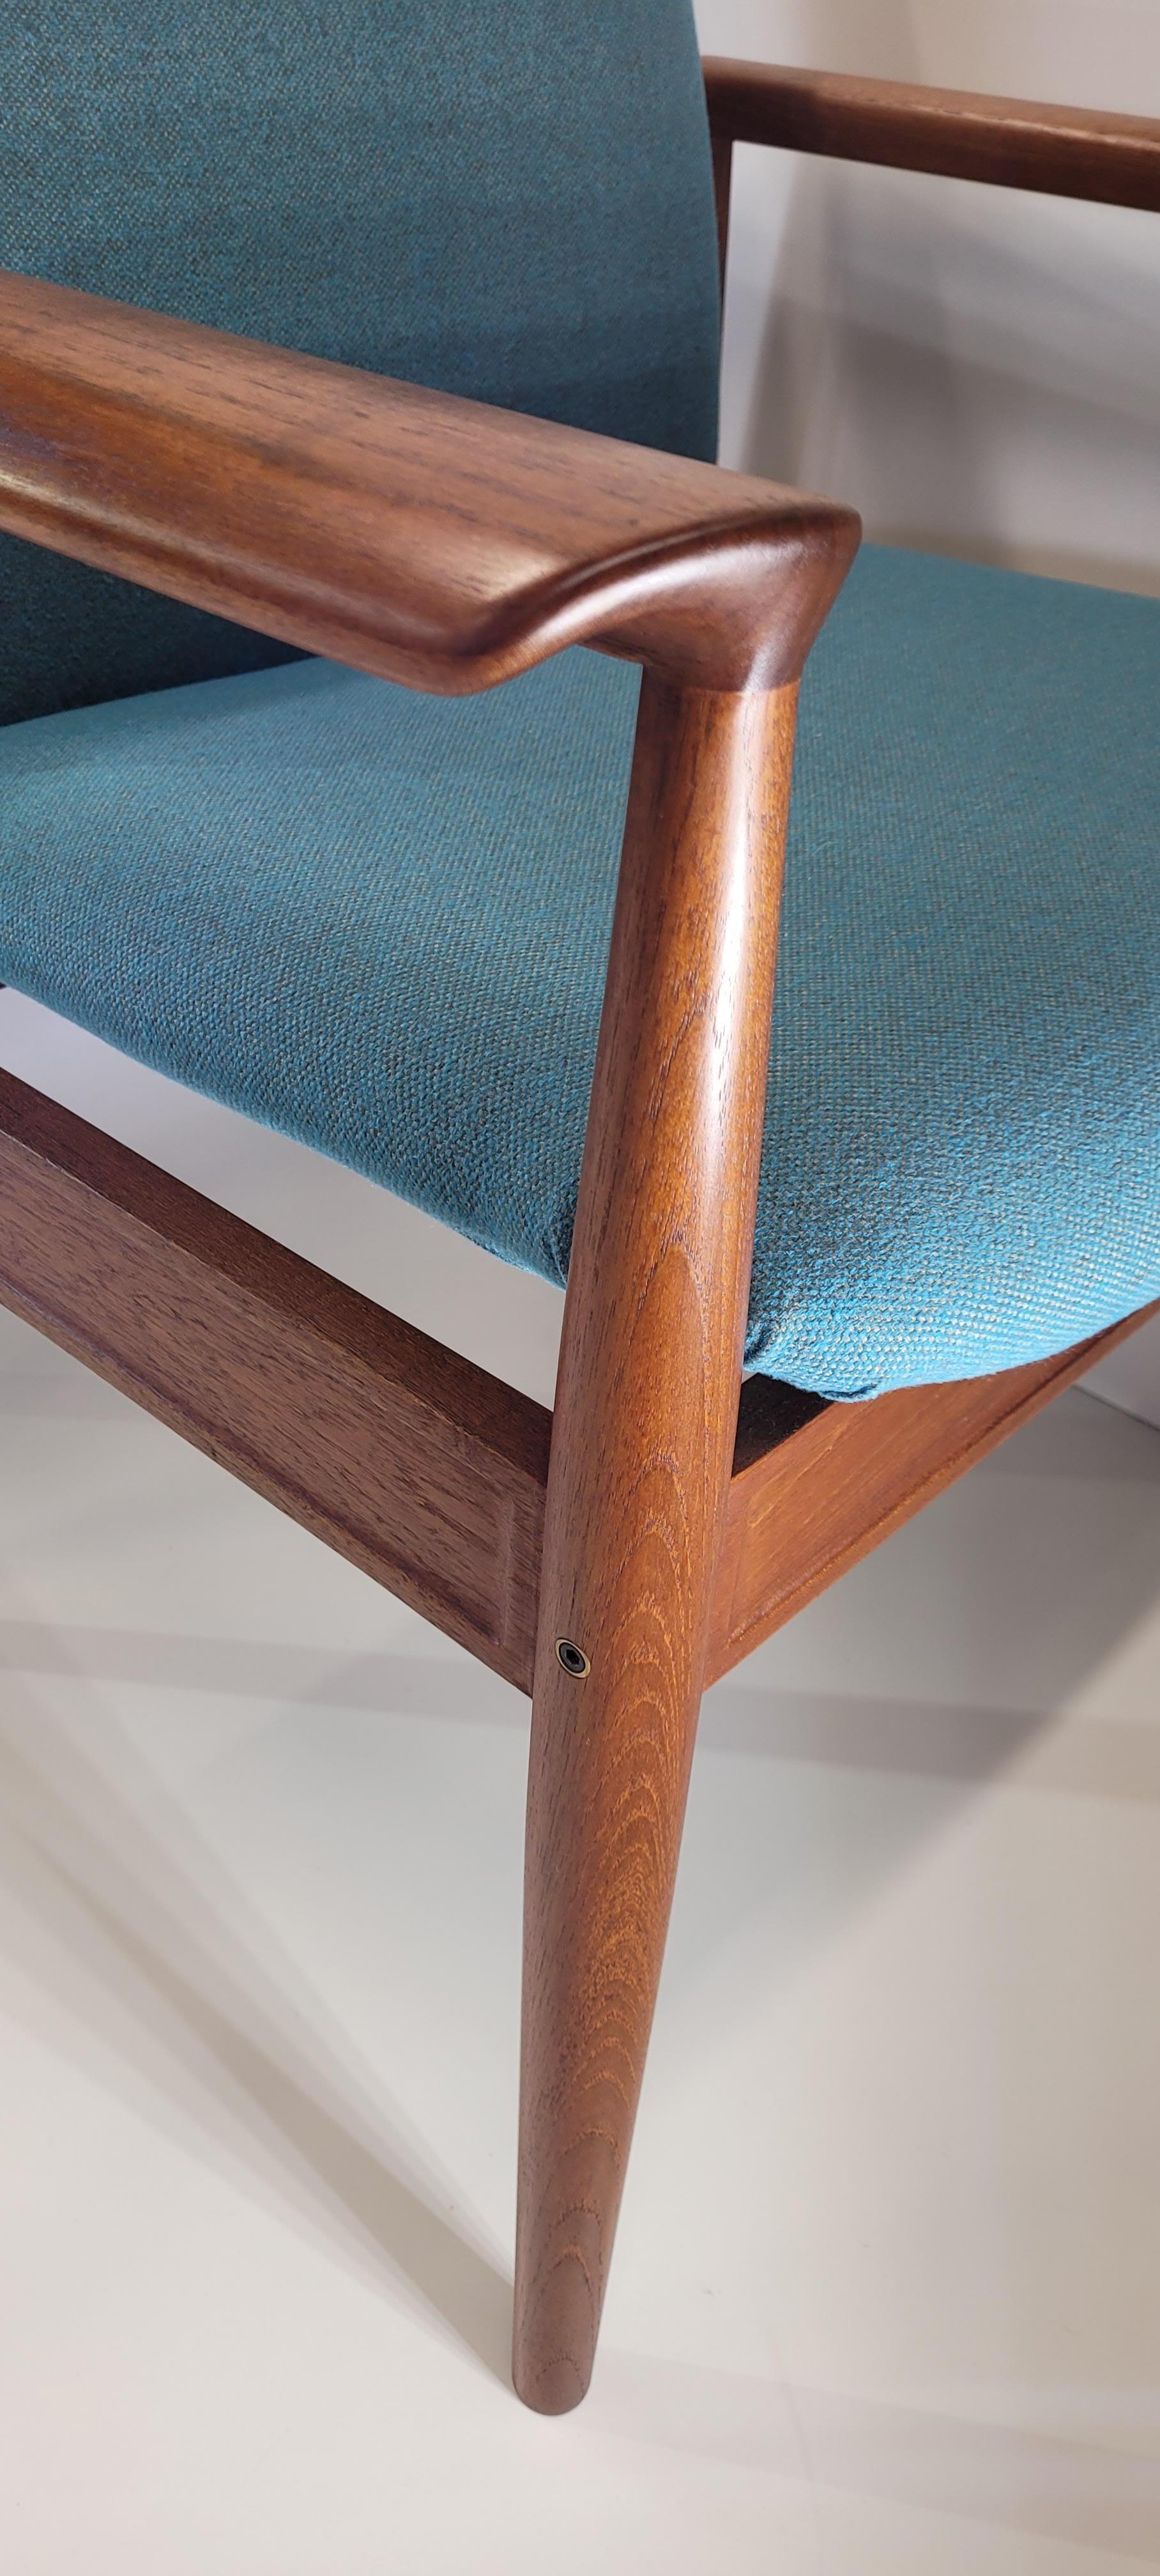 Pair of Diplomat Chair in Teak Wood and Teal Fabric by Finn Juhl  For Sale 1